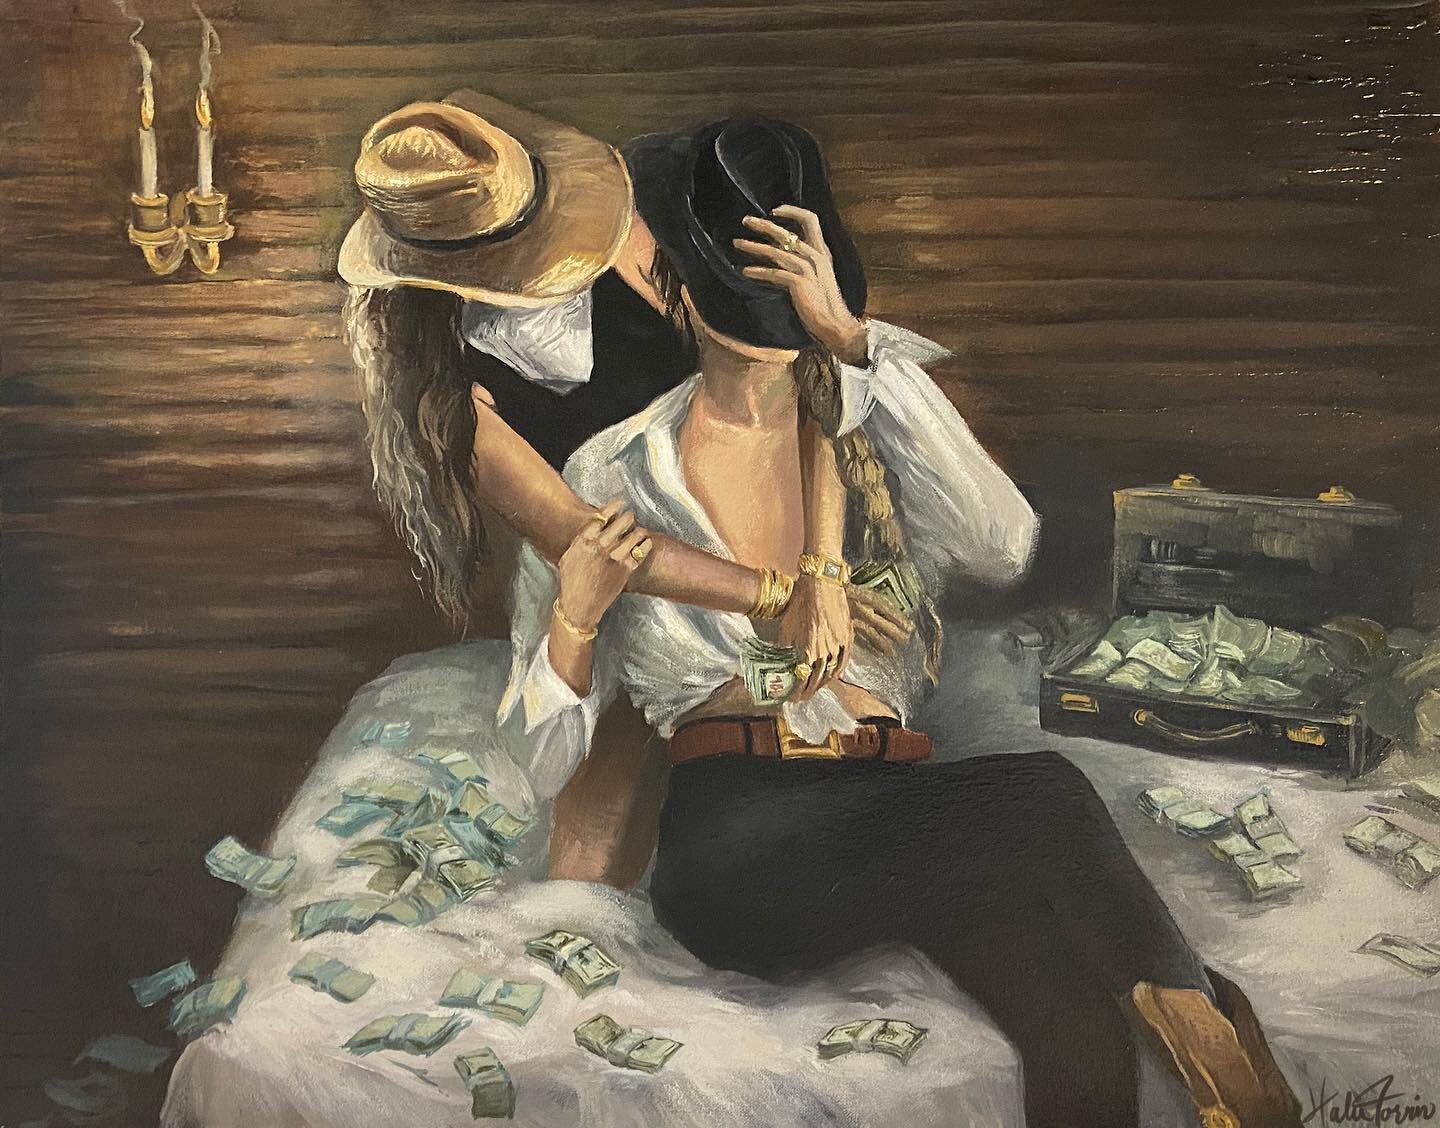 💸 &ldquo;cowgirl like me&rdquo; 
🎨 oil on canvas, 18&rdquo;x22&rdquo;
➡️ swipe for more pics
🎉 last day for pre-sale discount

&ldquo;i want to create paintings that i never saw &amp; needed to see growing up &mdash; that&rsquo;s my main goal with